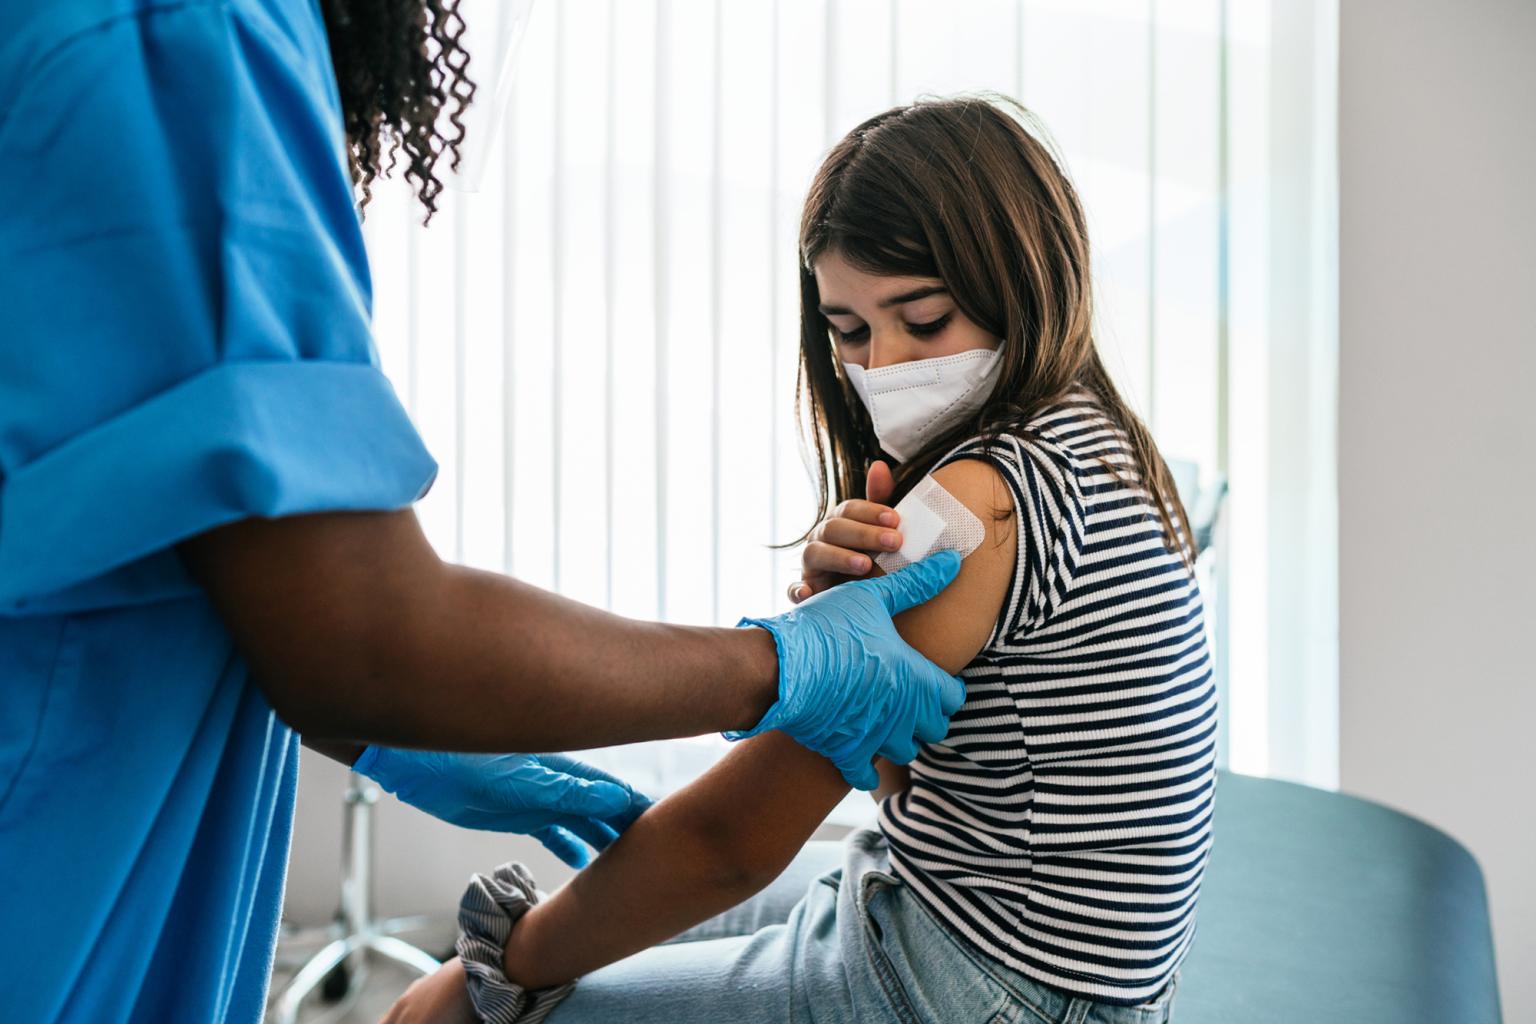 New York’s kid-vaccination collapse is a grim result of ‘expert’ COVID misinfo